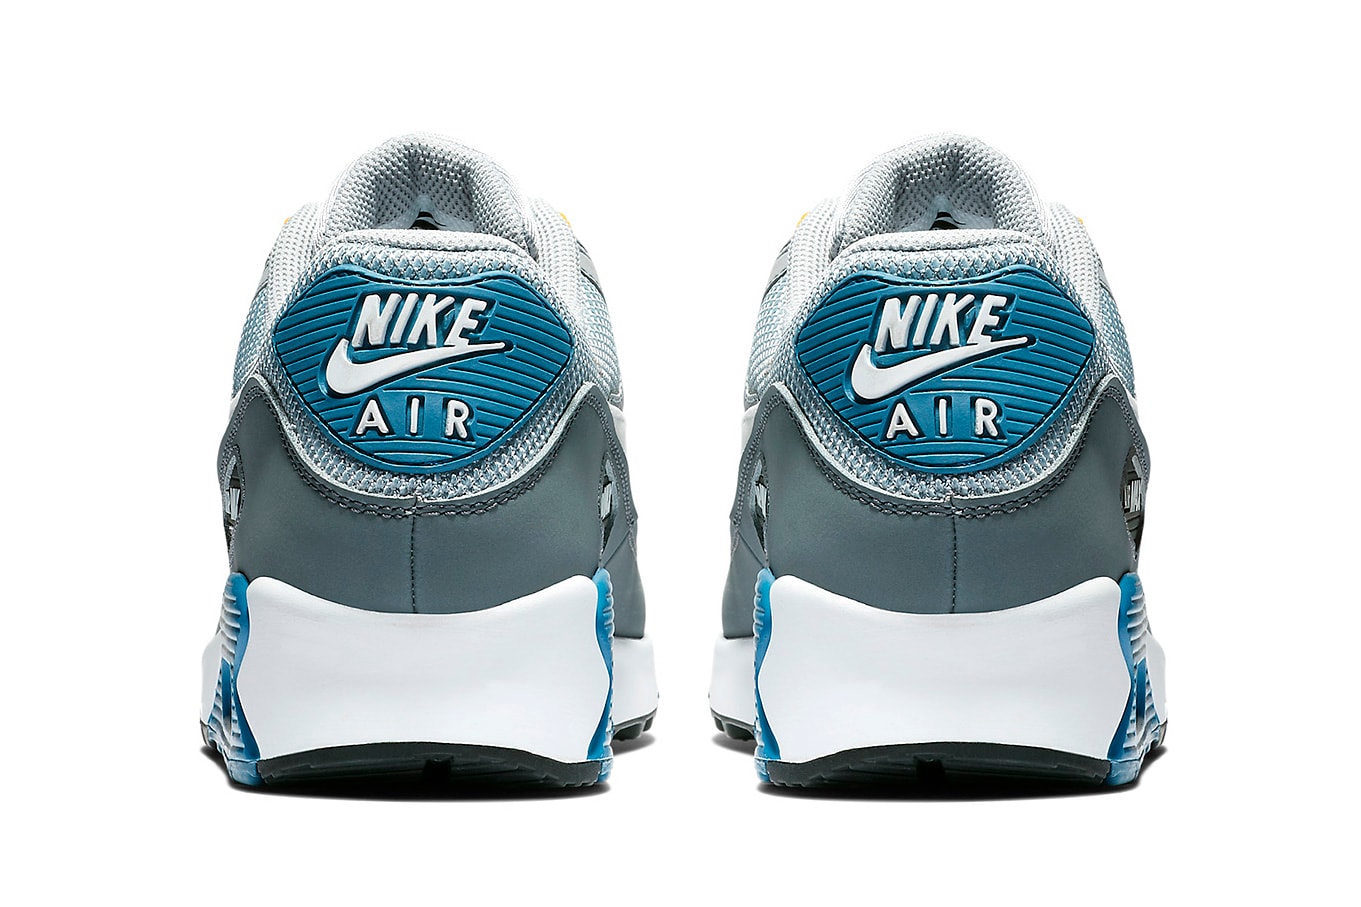 Nike Air Max 90 "Wolf Grey/Indigo Storm" Release Date january 2019 